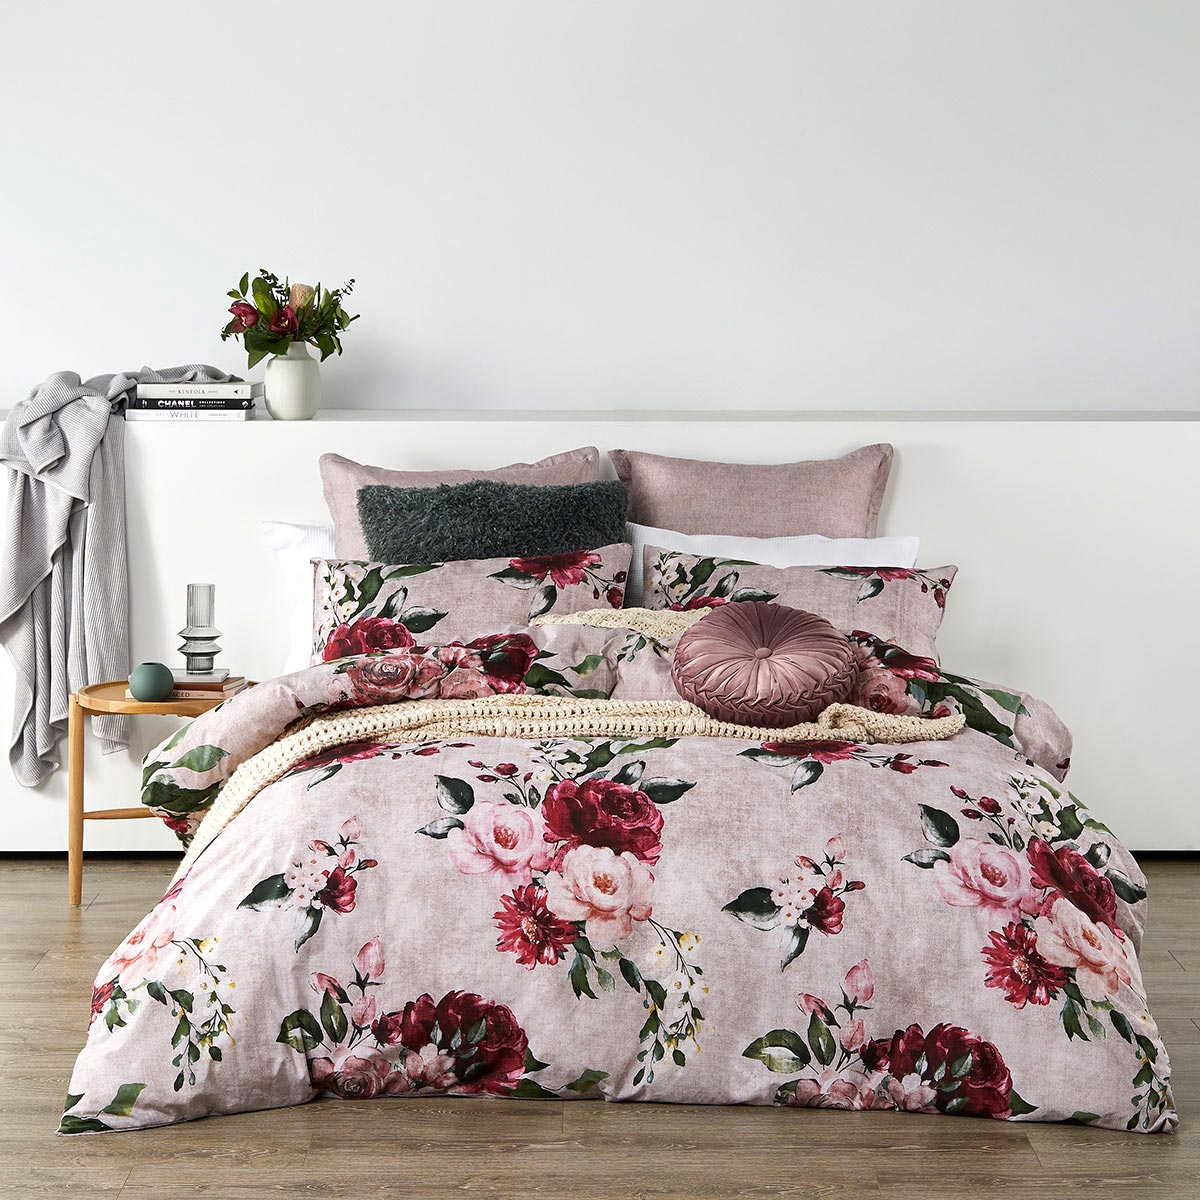 Cherub Rose Quilt Cover Set by Logan and Mason | Quilt Cover World